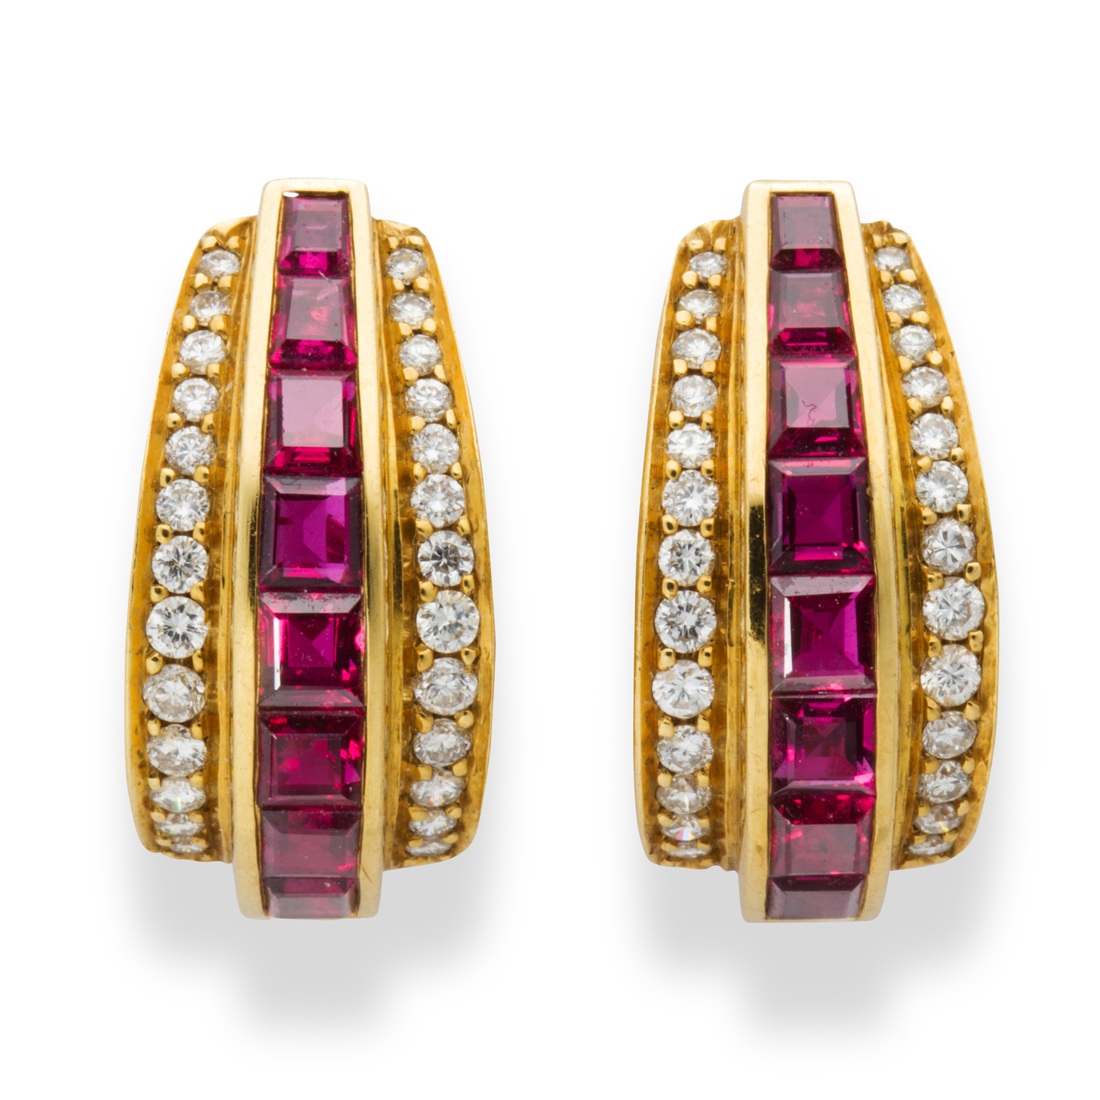 A PAIR OF RUBY, DIAMOND AND EIGHTEEN